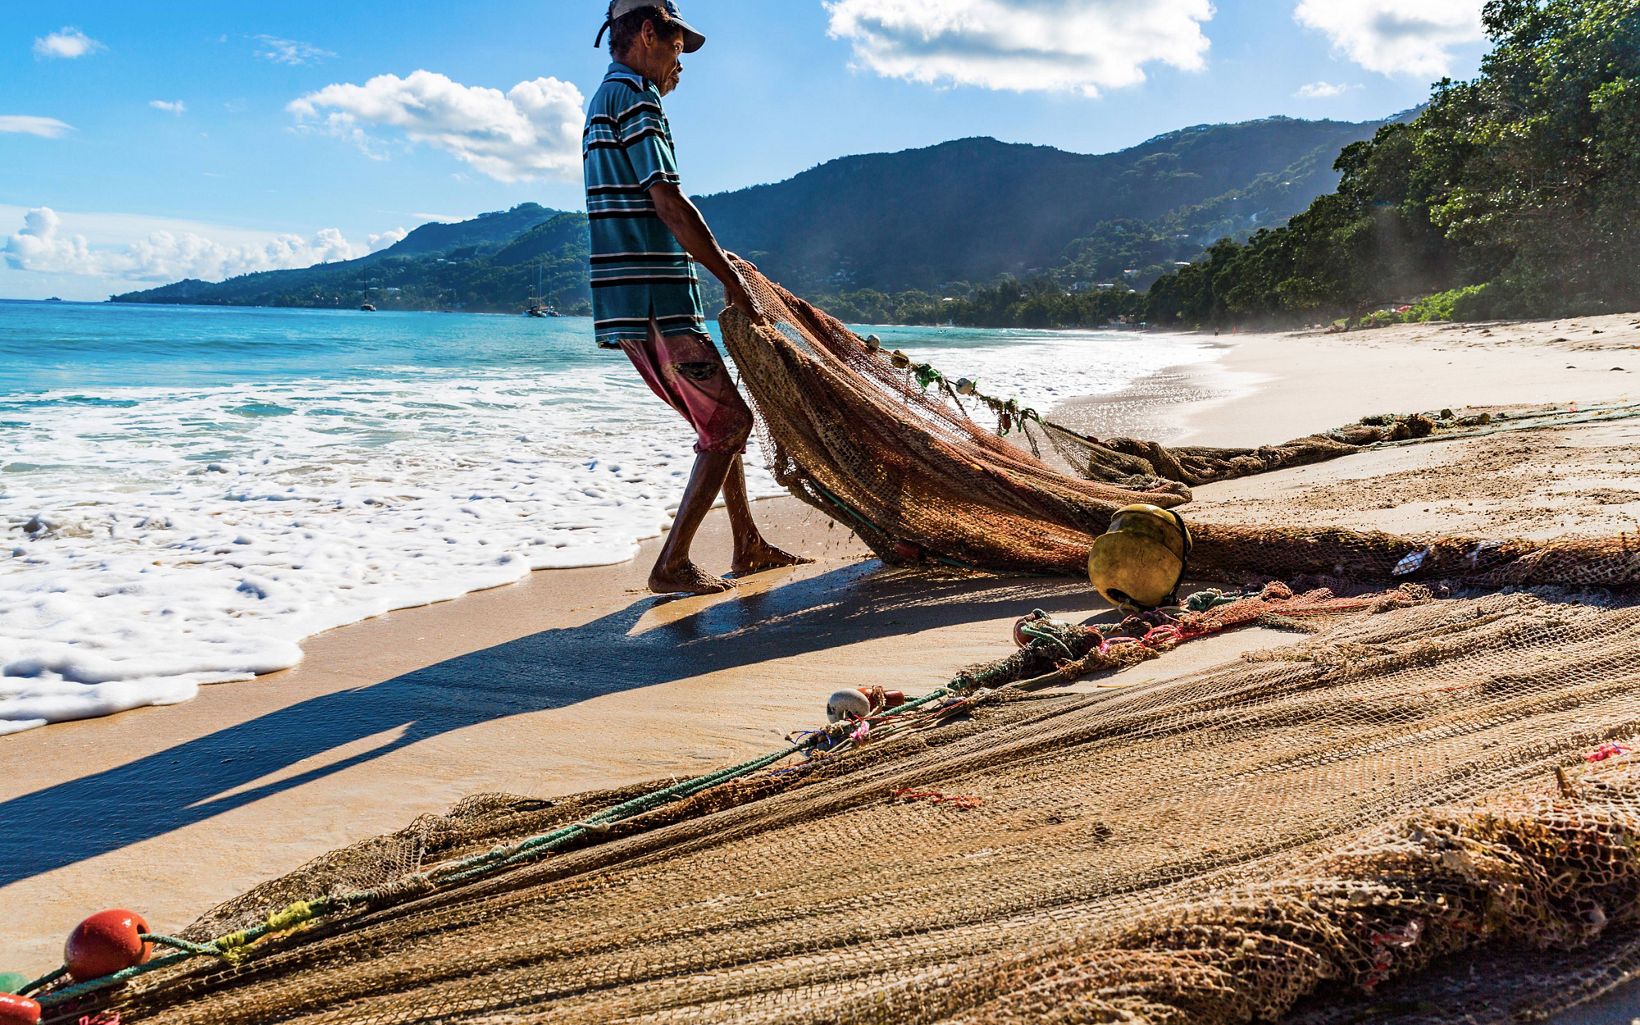 Seychelles After using the Blue Bonds model to refinance a portion of its debt, the Seychelles is on track to meet its conservation goals by 2020. © Jason Houston for The Nature Conservancy